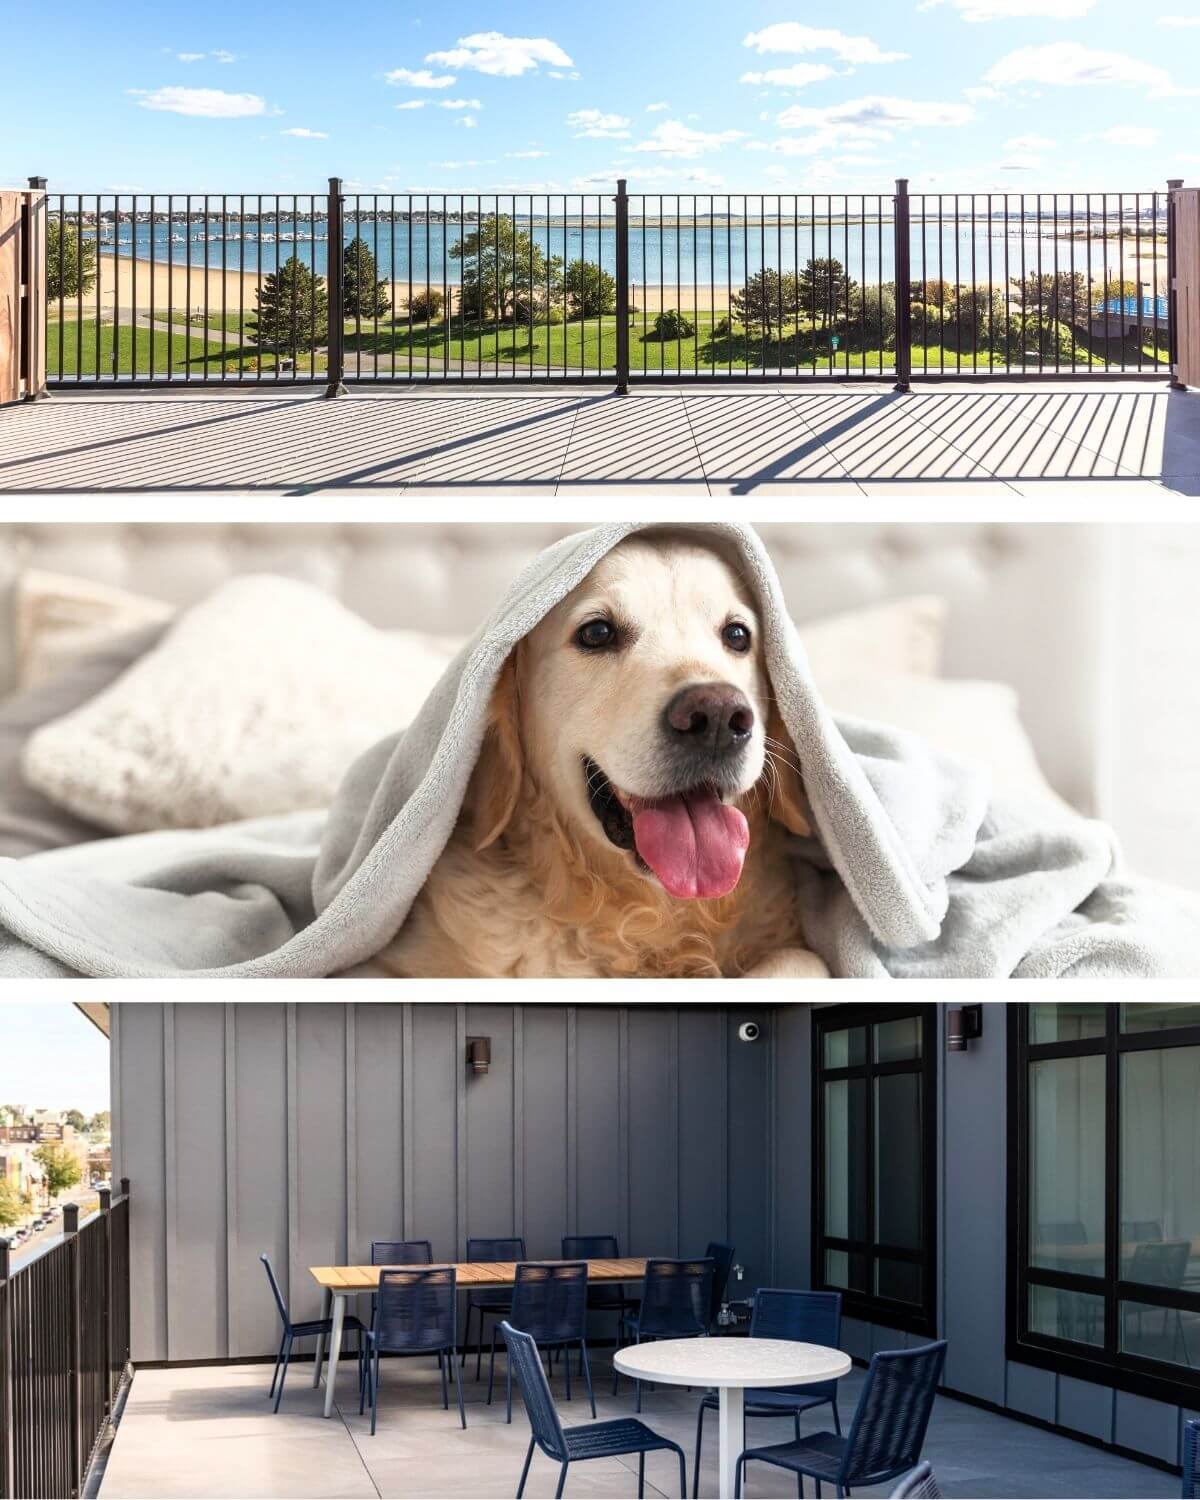 View of the water, outdoor terrace area and a dog underneath a blanket